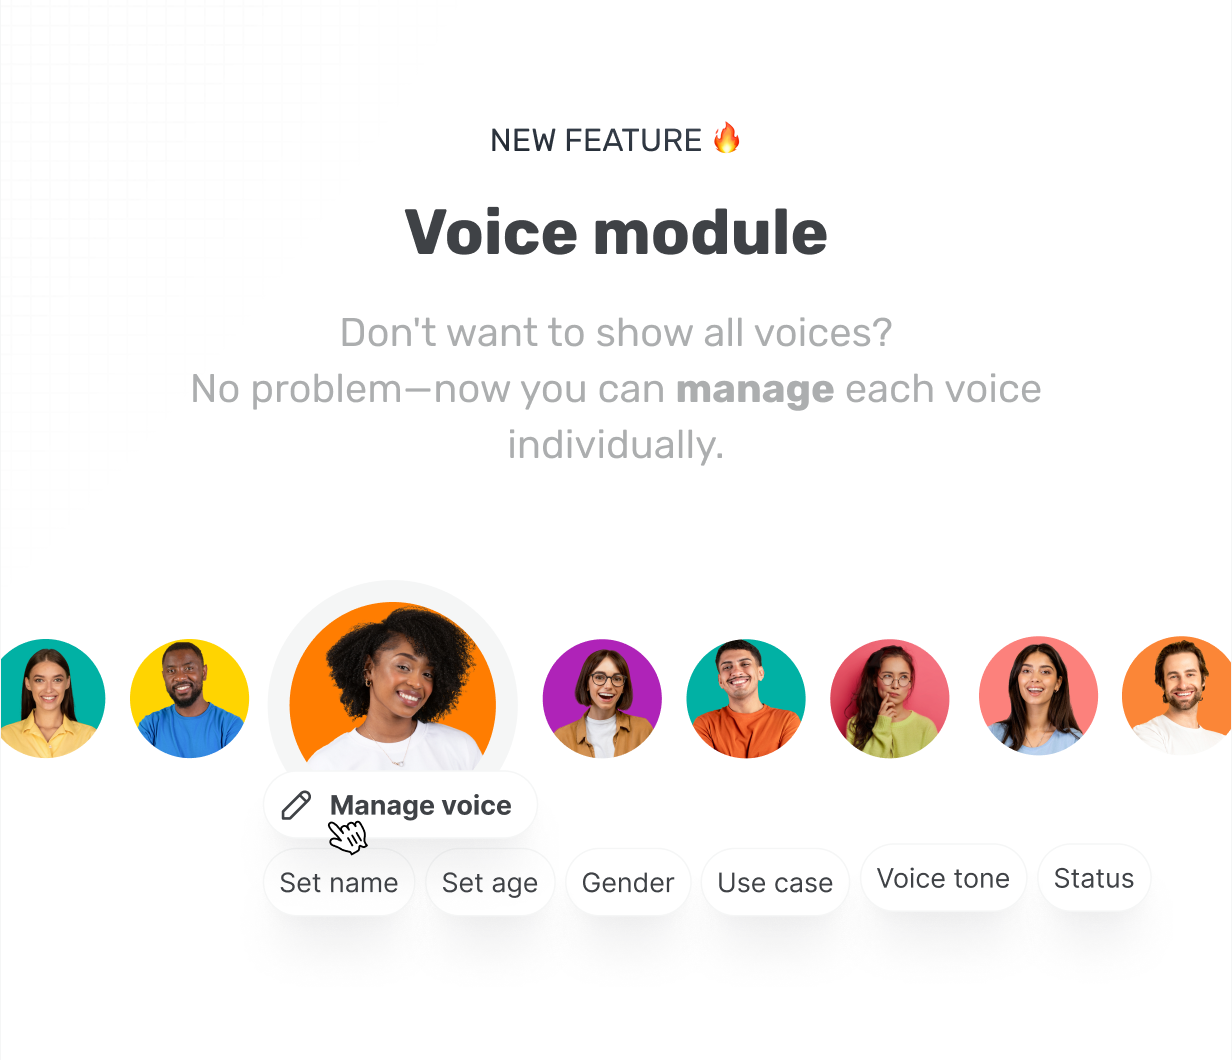 Don't want to show all voices? No problem, now you can manage each voice individually. @heyaikeedo #aikeedo